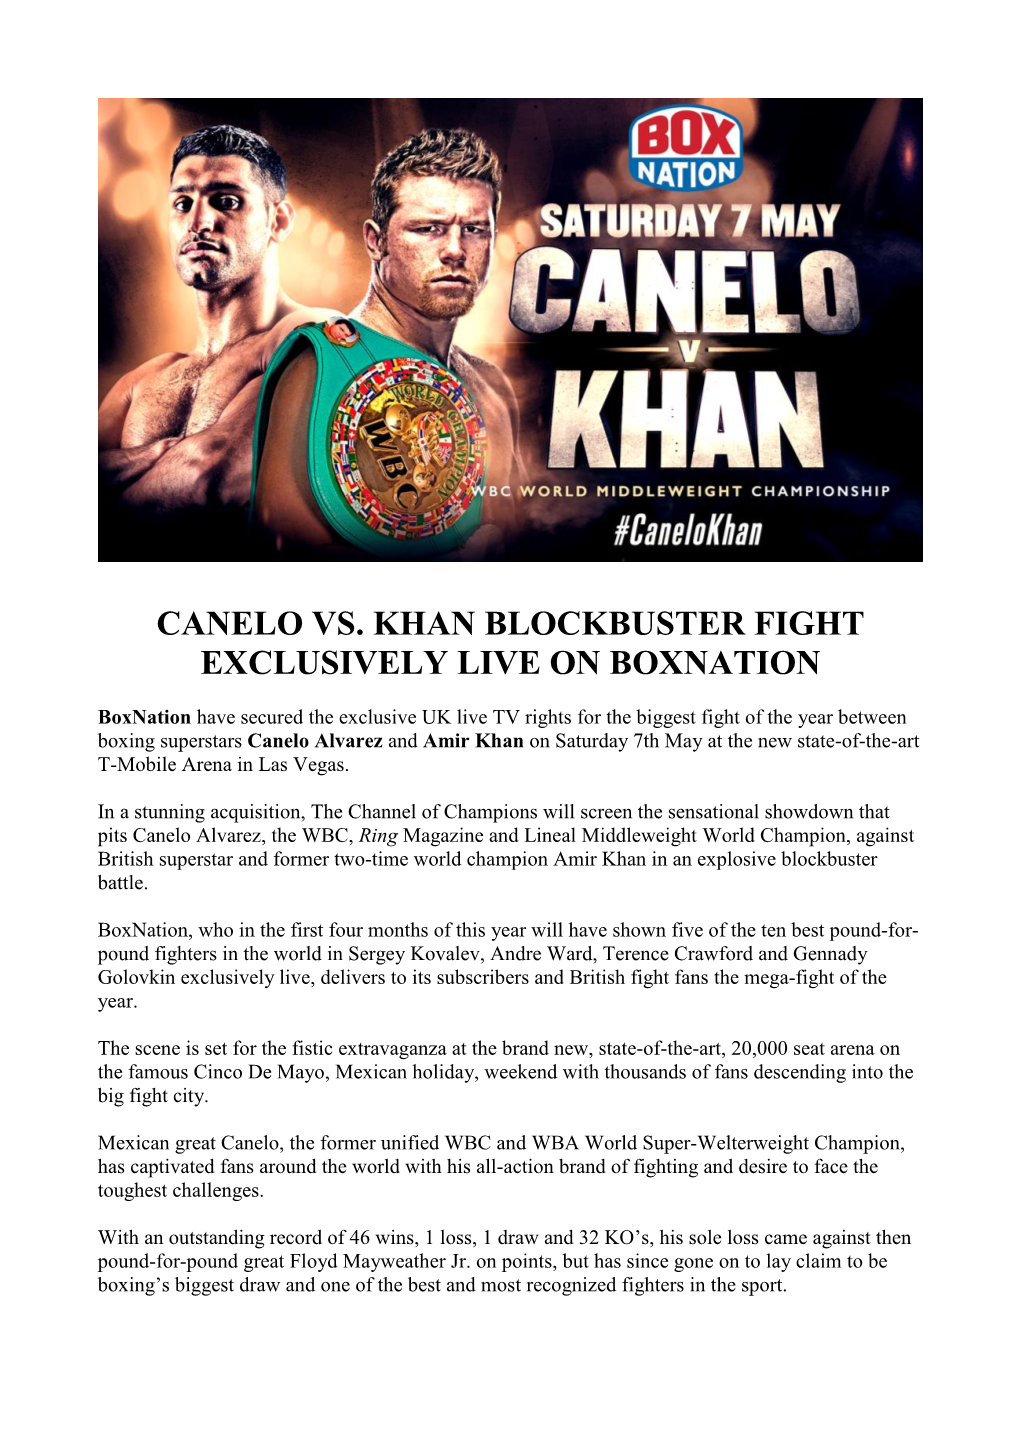 Canelo Vs. Khan Blockbuster Fight Exclusively Live on Boxnation